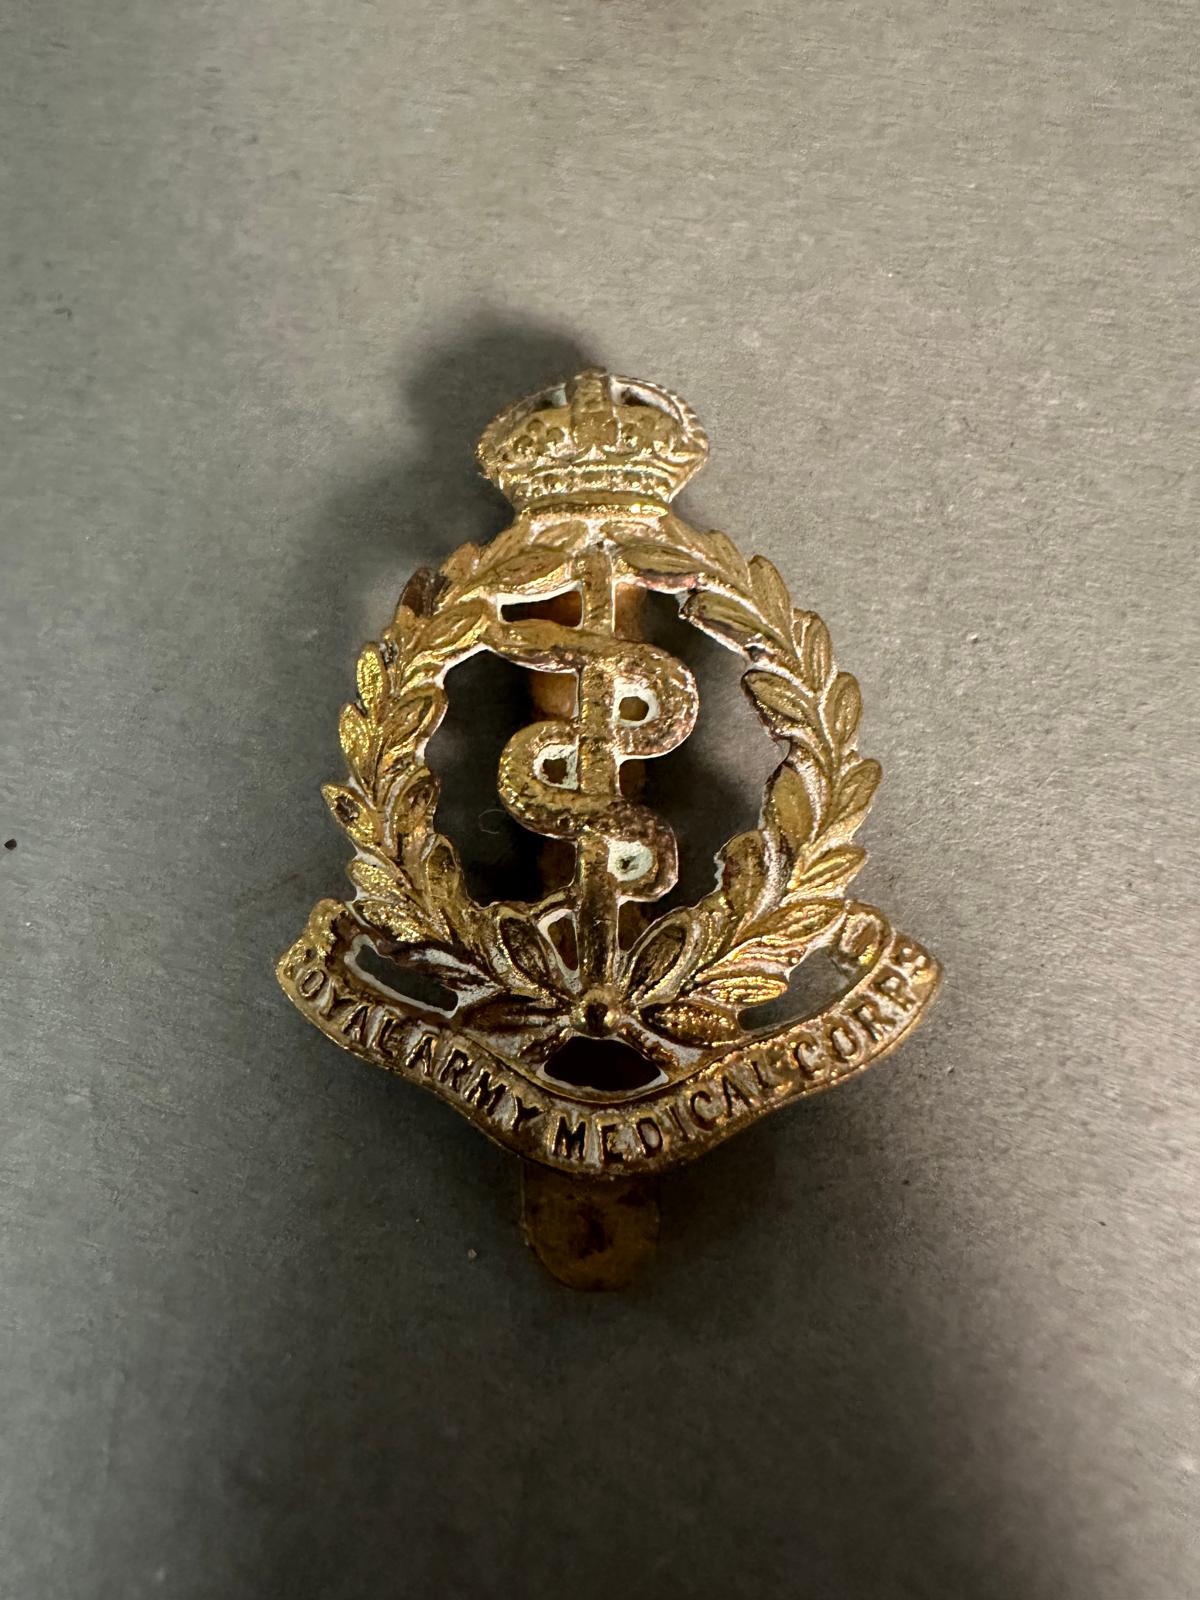 A selection of military capo badges and insignia various regiments to include Royal Artillery, - Image 2 of 9